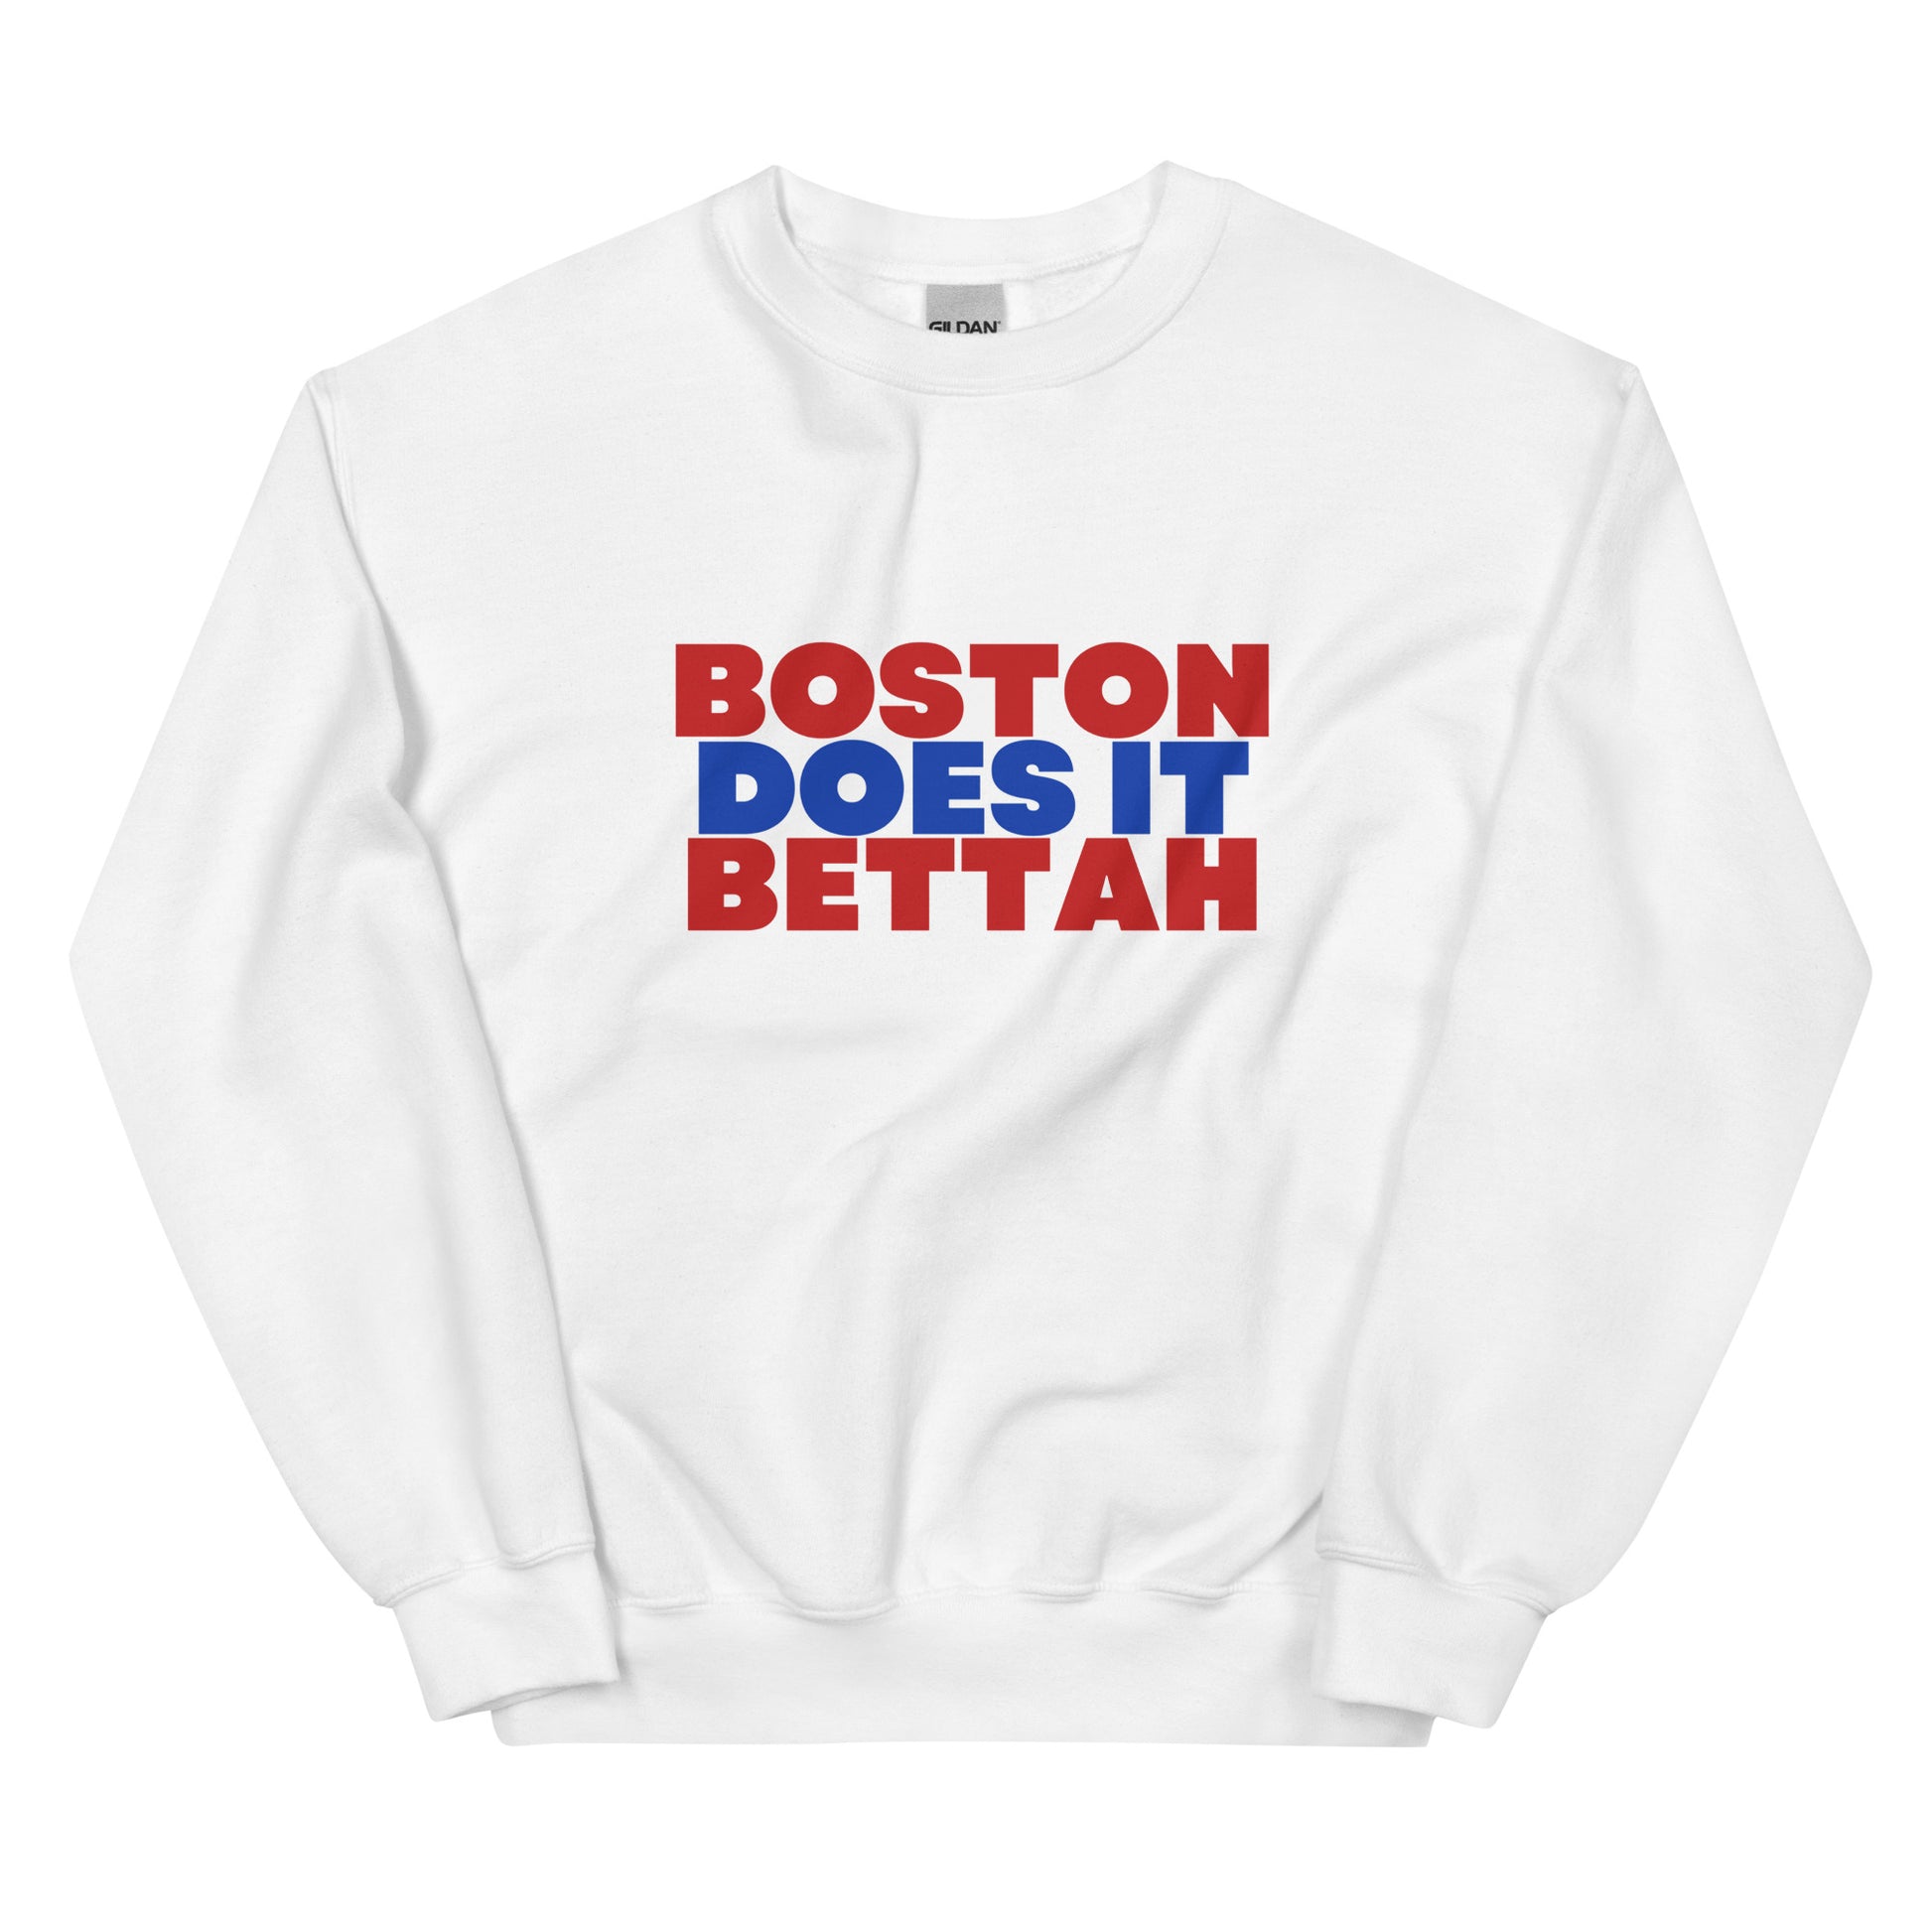 white crewneck that says "boston does it bettah" in red and blue lettering